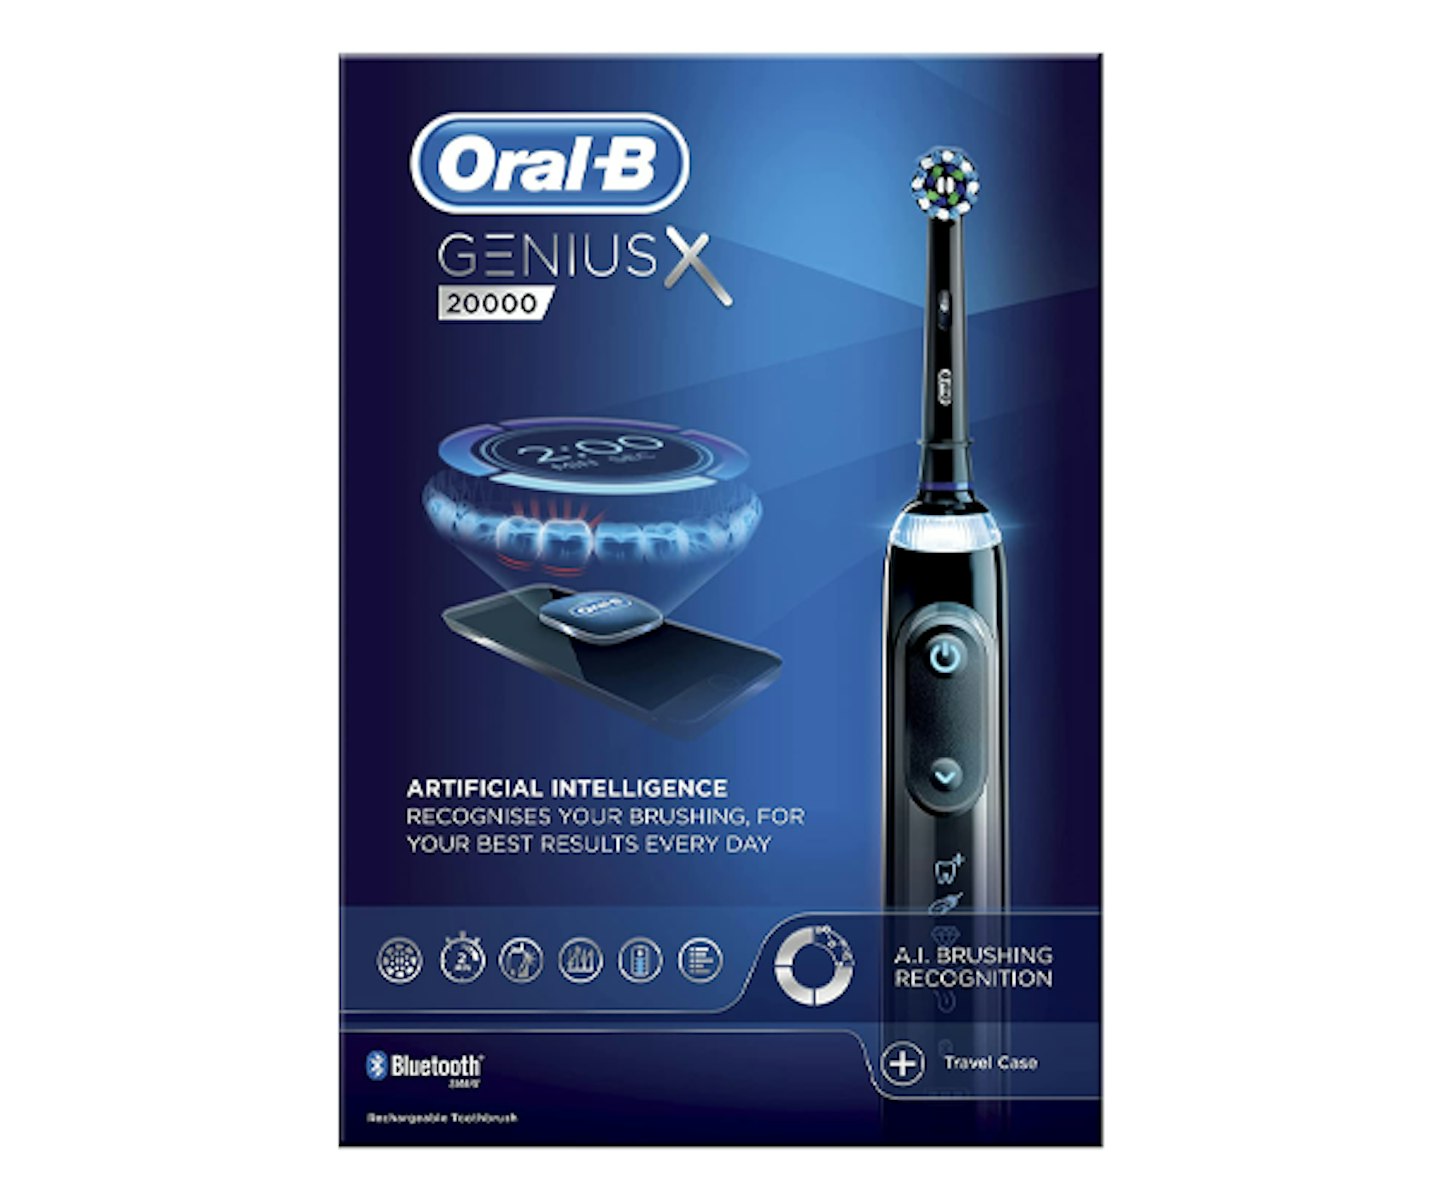 Oral-B Genius X with Artificial Intelligence Black Electric Toothbrush, Two Pin Plug